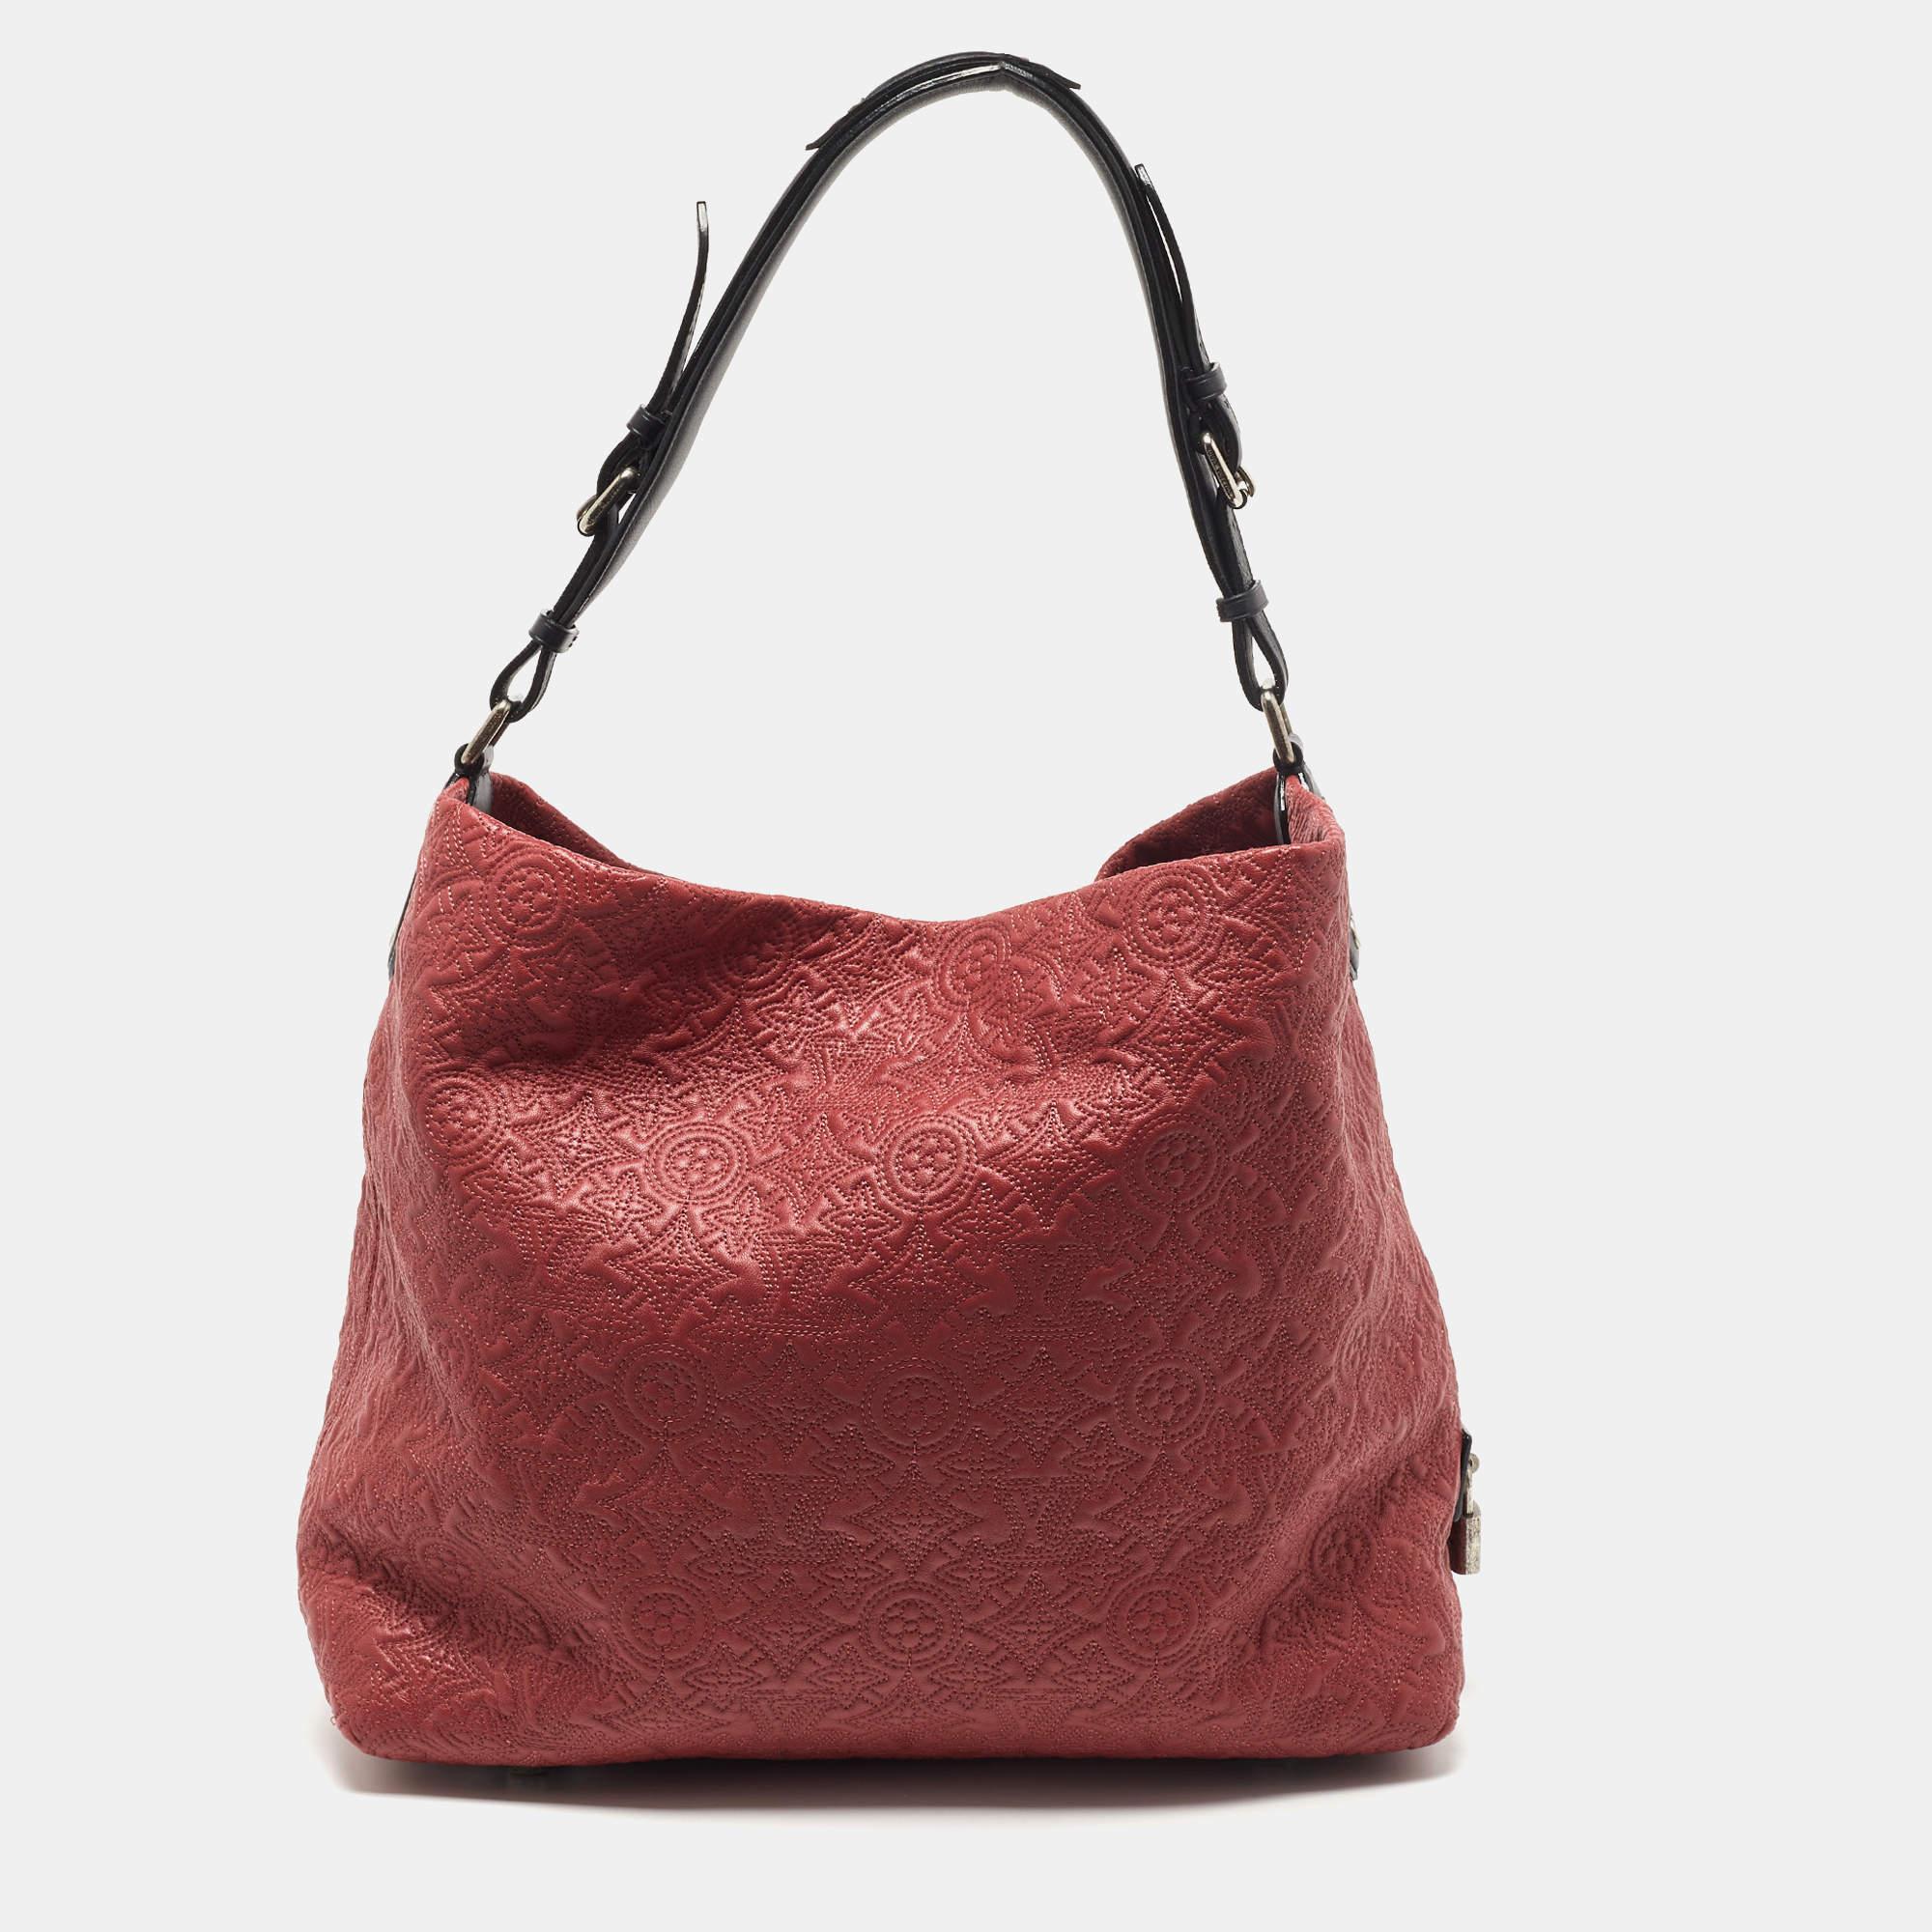 Louis Vuitton's handbags are popular owing to their high style and functionality. This Antheia PM bag, like all the other handbags, is durable and stylish. Crafted from Monogram leather, the bag can be paraded using the top handle. It is complete